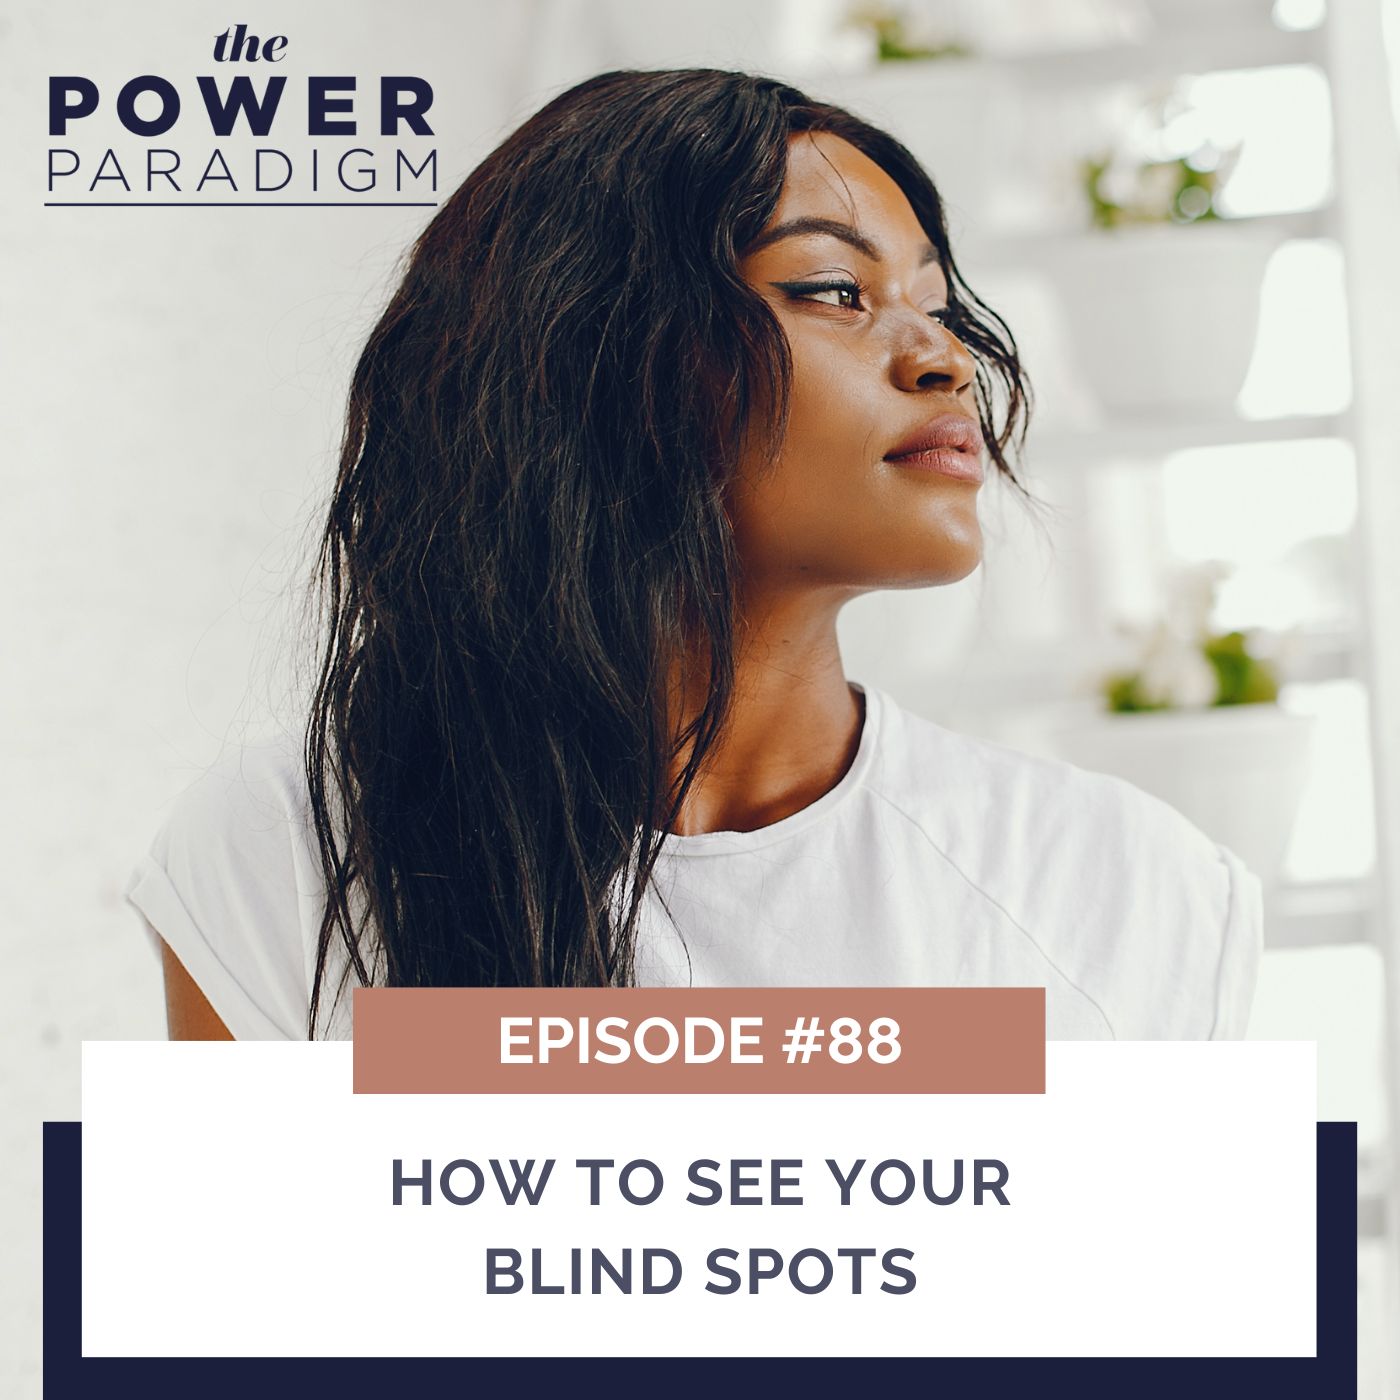 The Power Paradigm™ | How to See Your Blind Spots